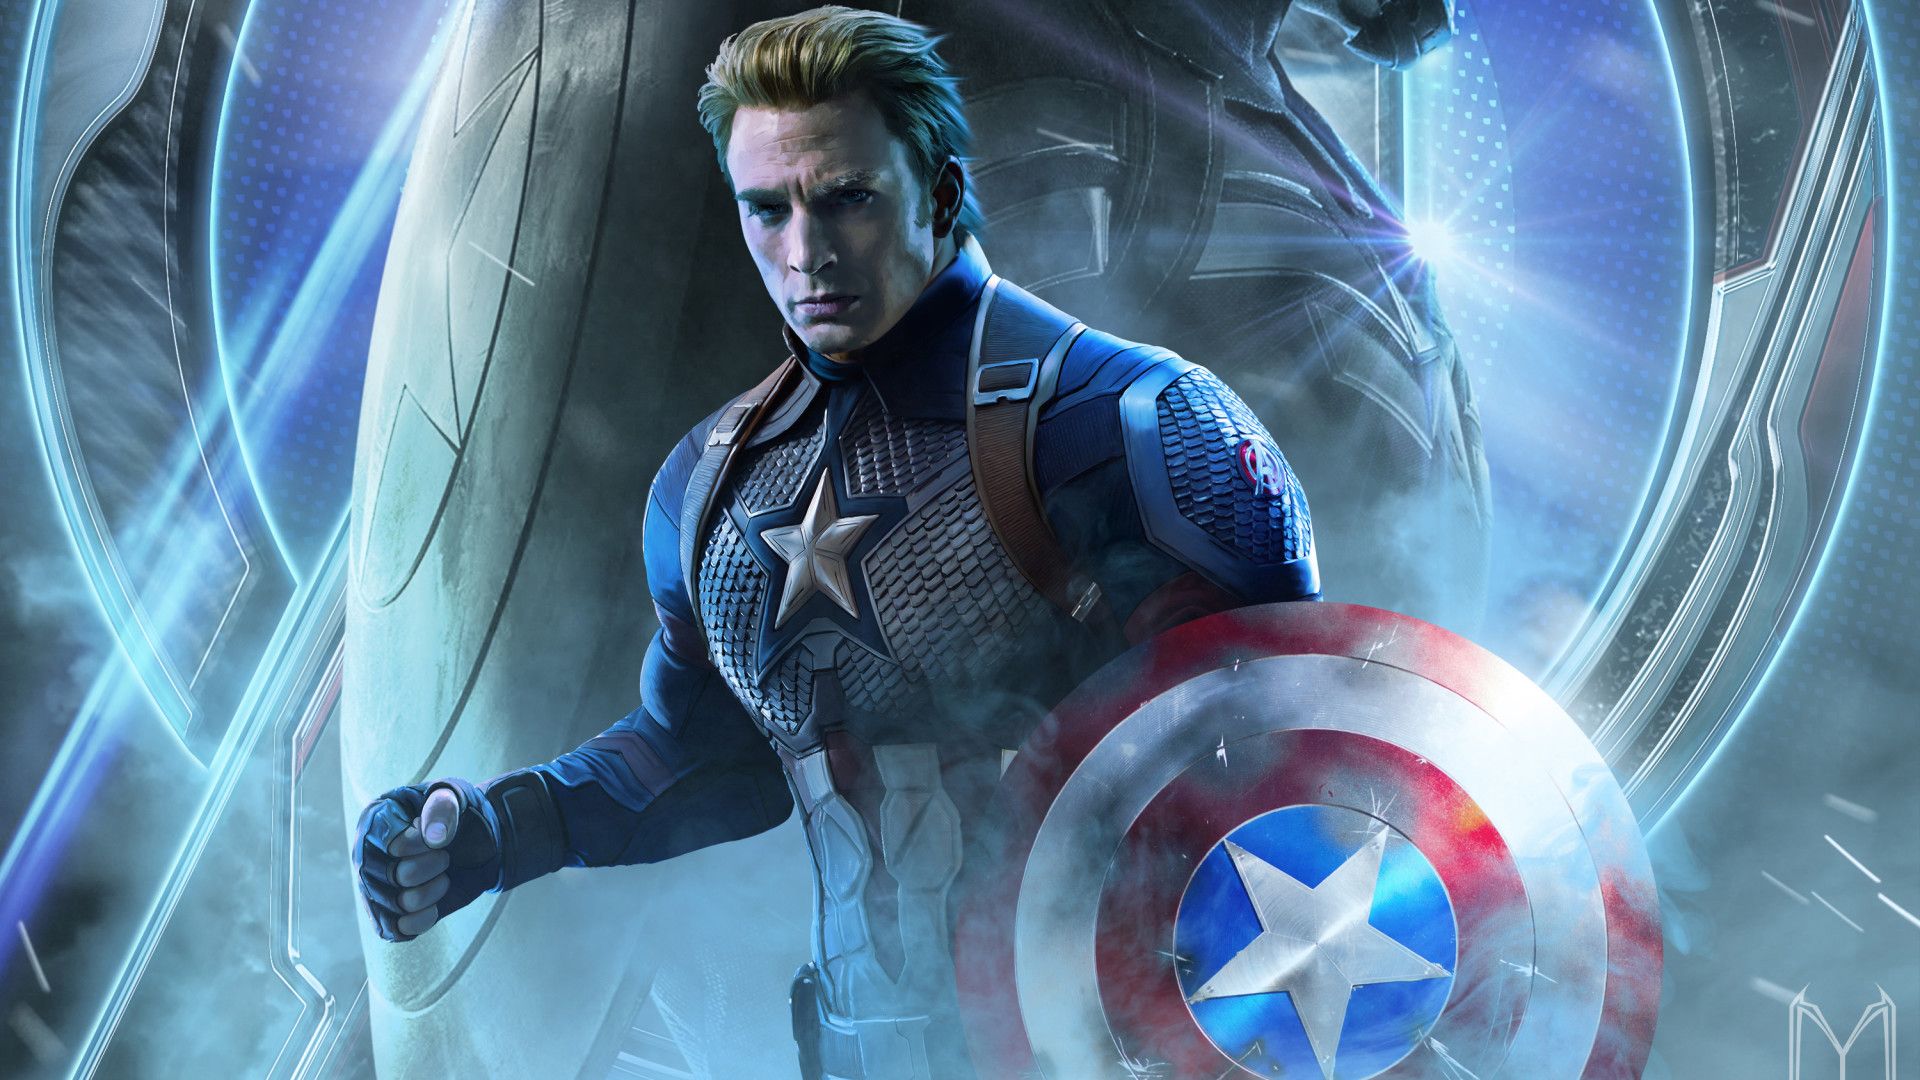 Captain America In Avengers Endgame 2019 Laptop Full HD 1080P HD 4k Wallpaper, Image, Background, Photo and Picture